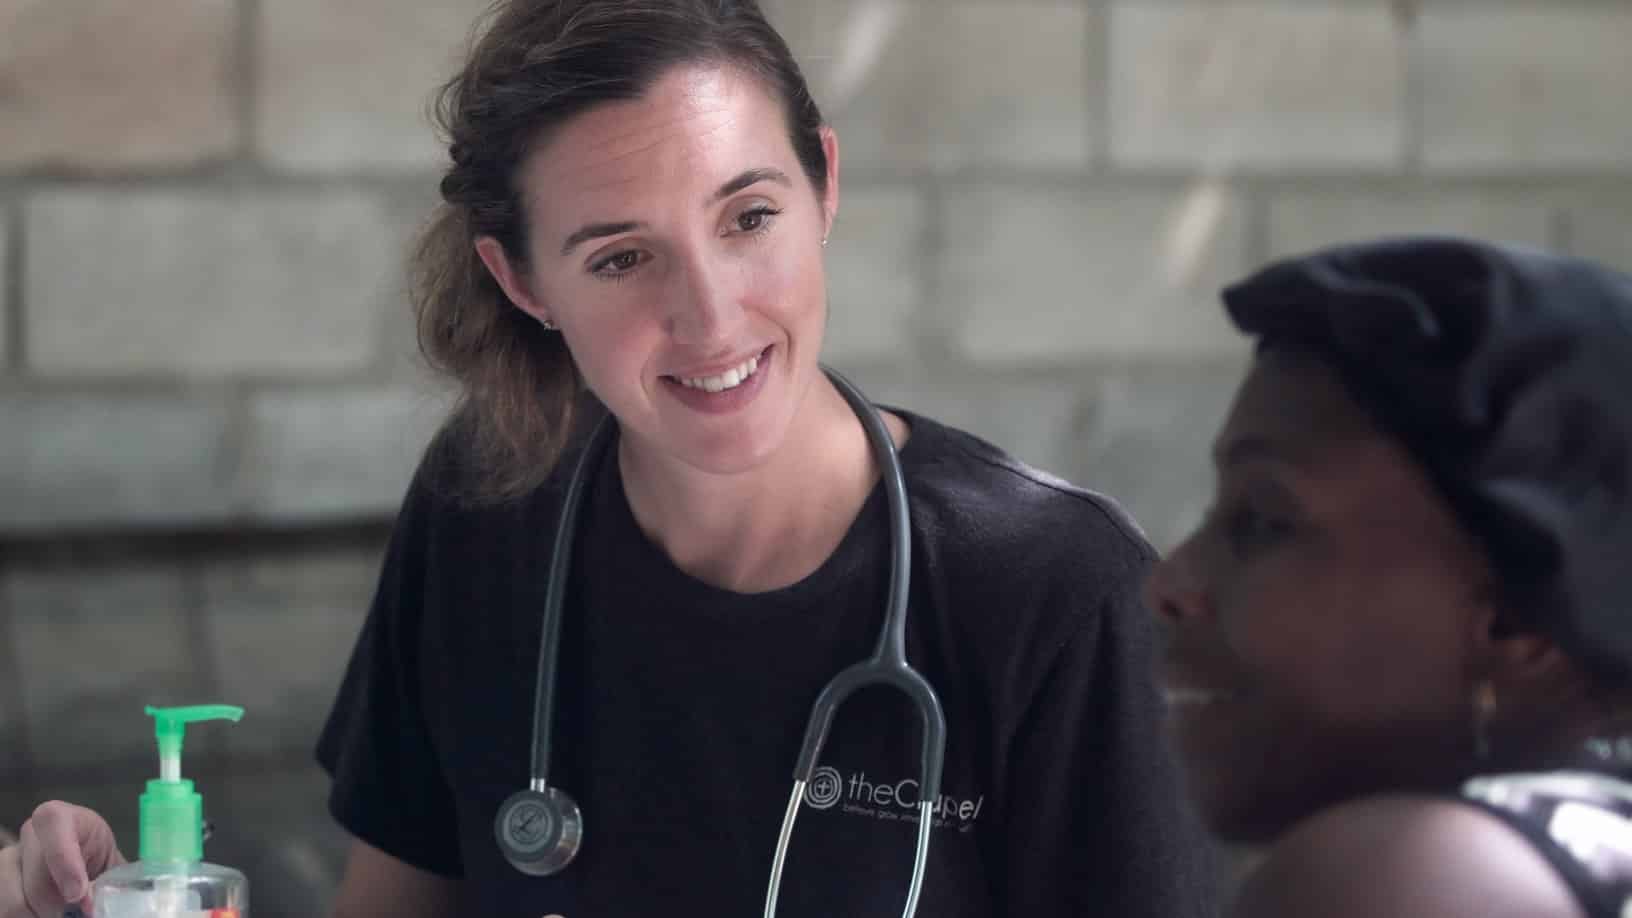 a health care worker with a stethoscope around her neck